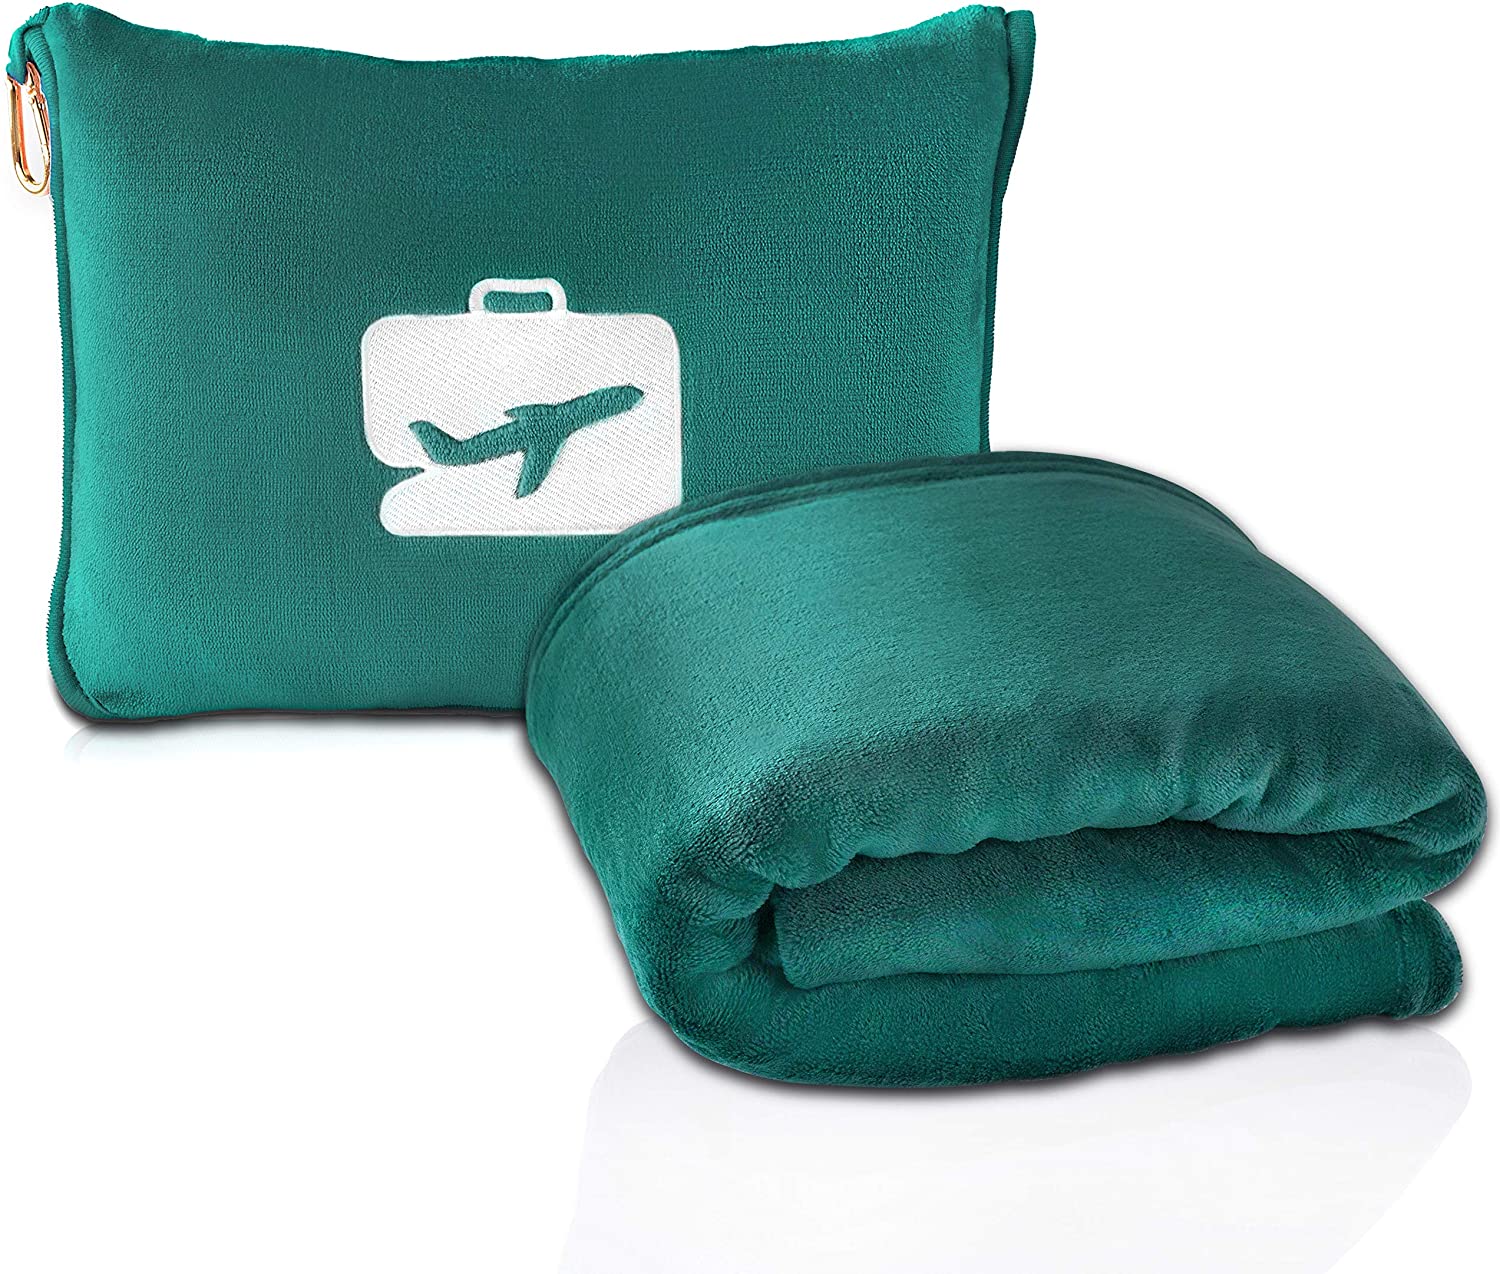 EverSnug 2 in 1 Airplane Travel Blanket and Pillow